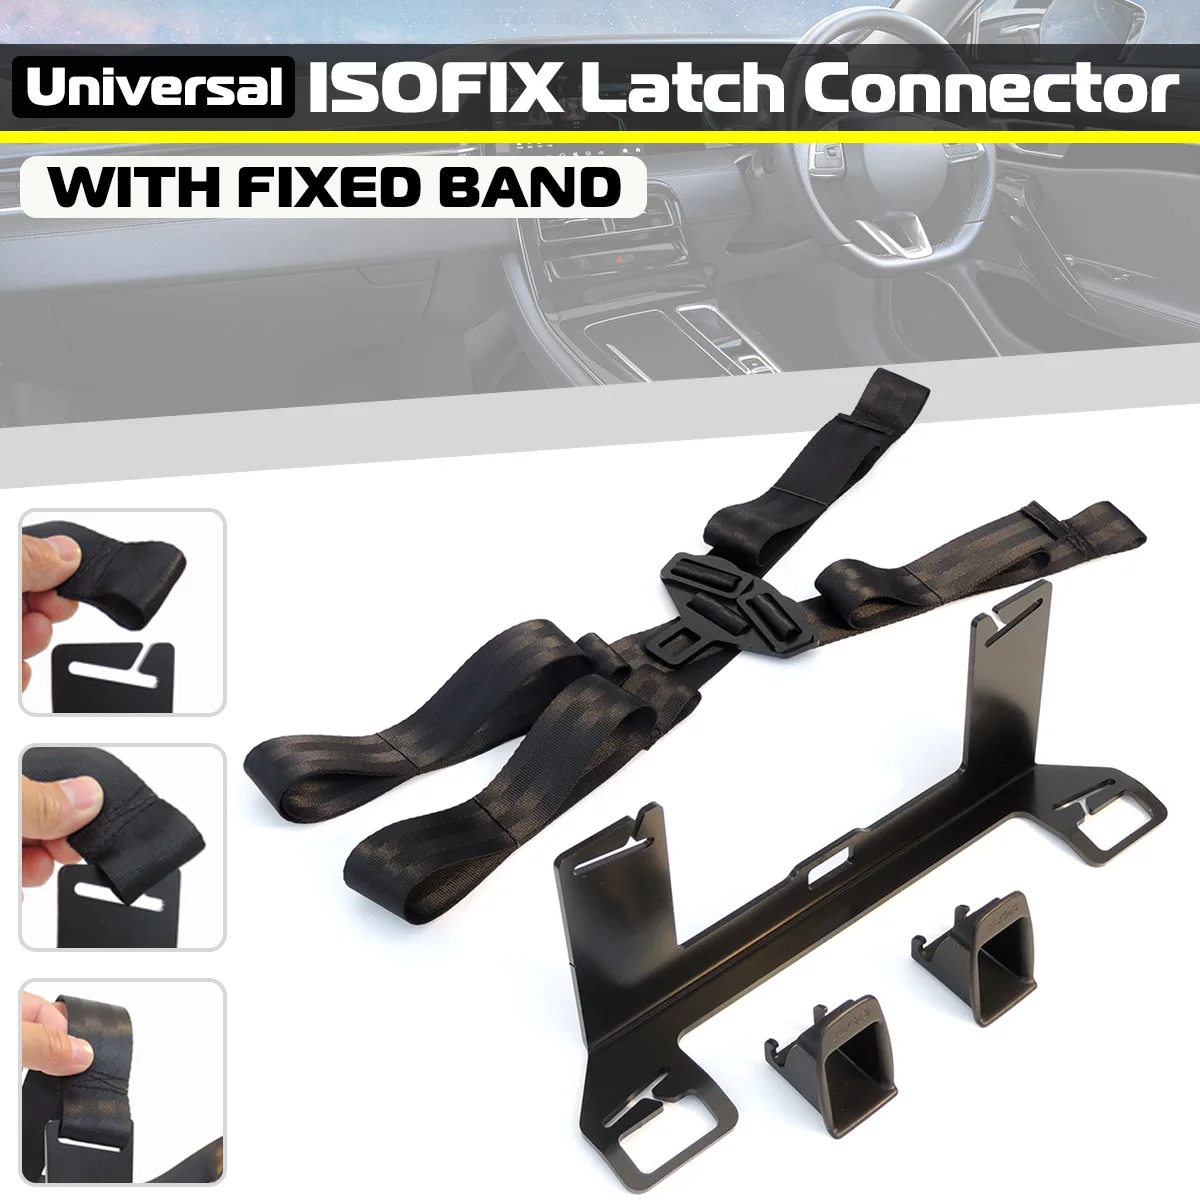 Universal Car Seat Belt Interfaces Guide Bracket Child Safety Seat Interface For ISOFIX Latch Seatbelt Connector Stand Holder